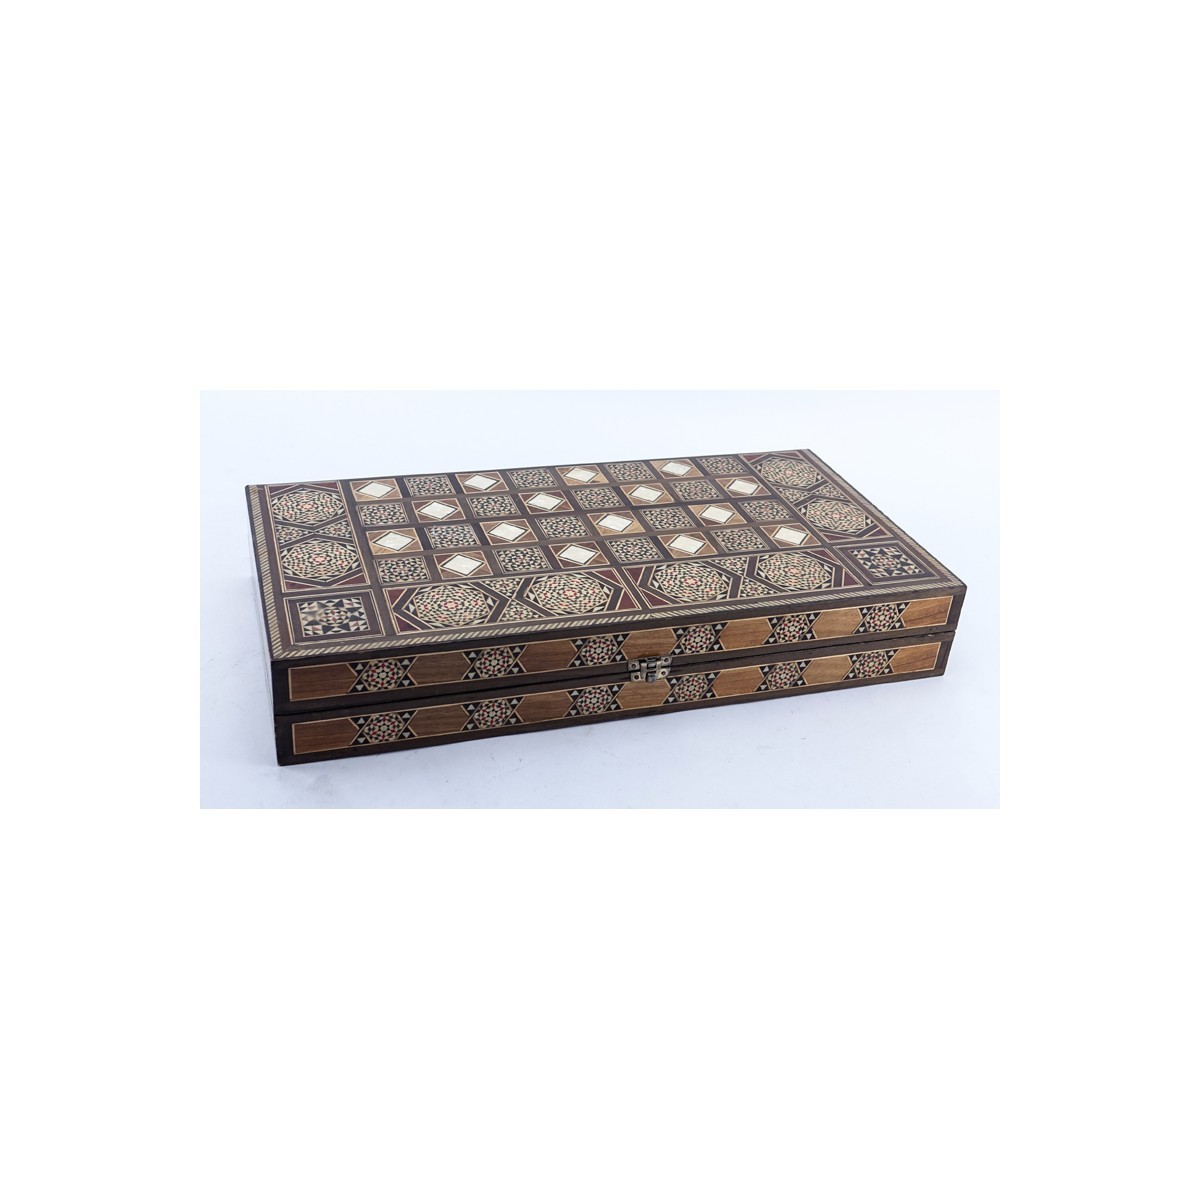 Early Persian Mosaic Wood and Mother of Pearl Inlaid Backgammon Case with Game Pieces. Typical rubbing to case, basic wear and possibly missing a few game pieces otherwise good condition.